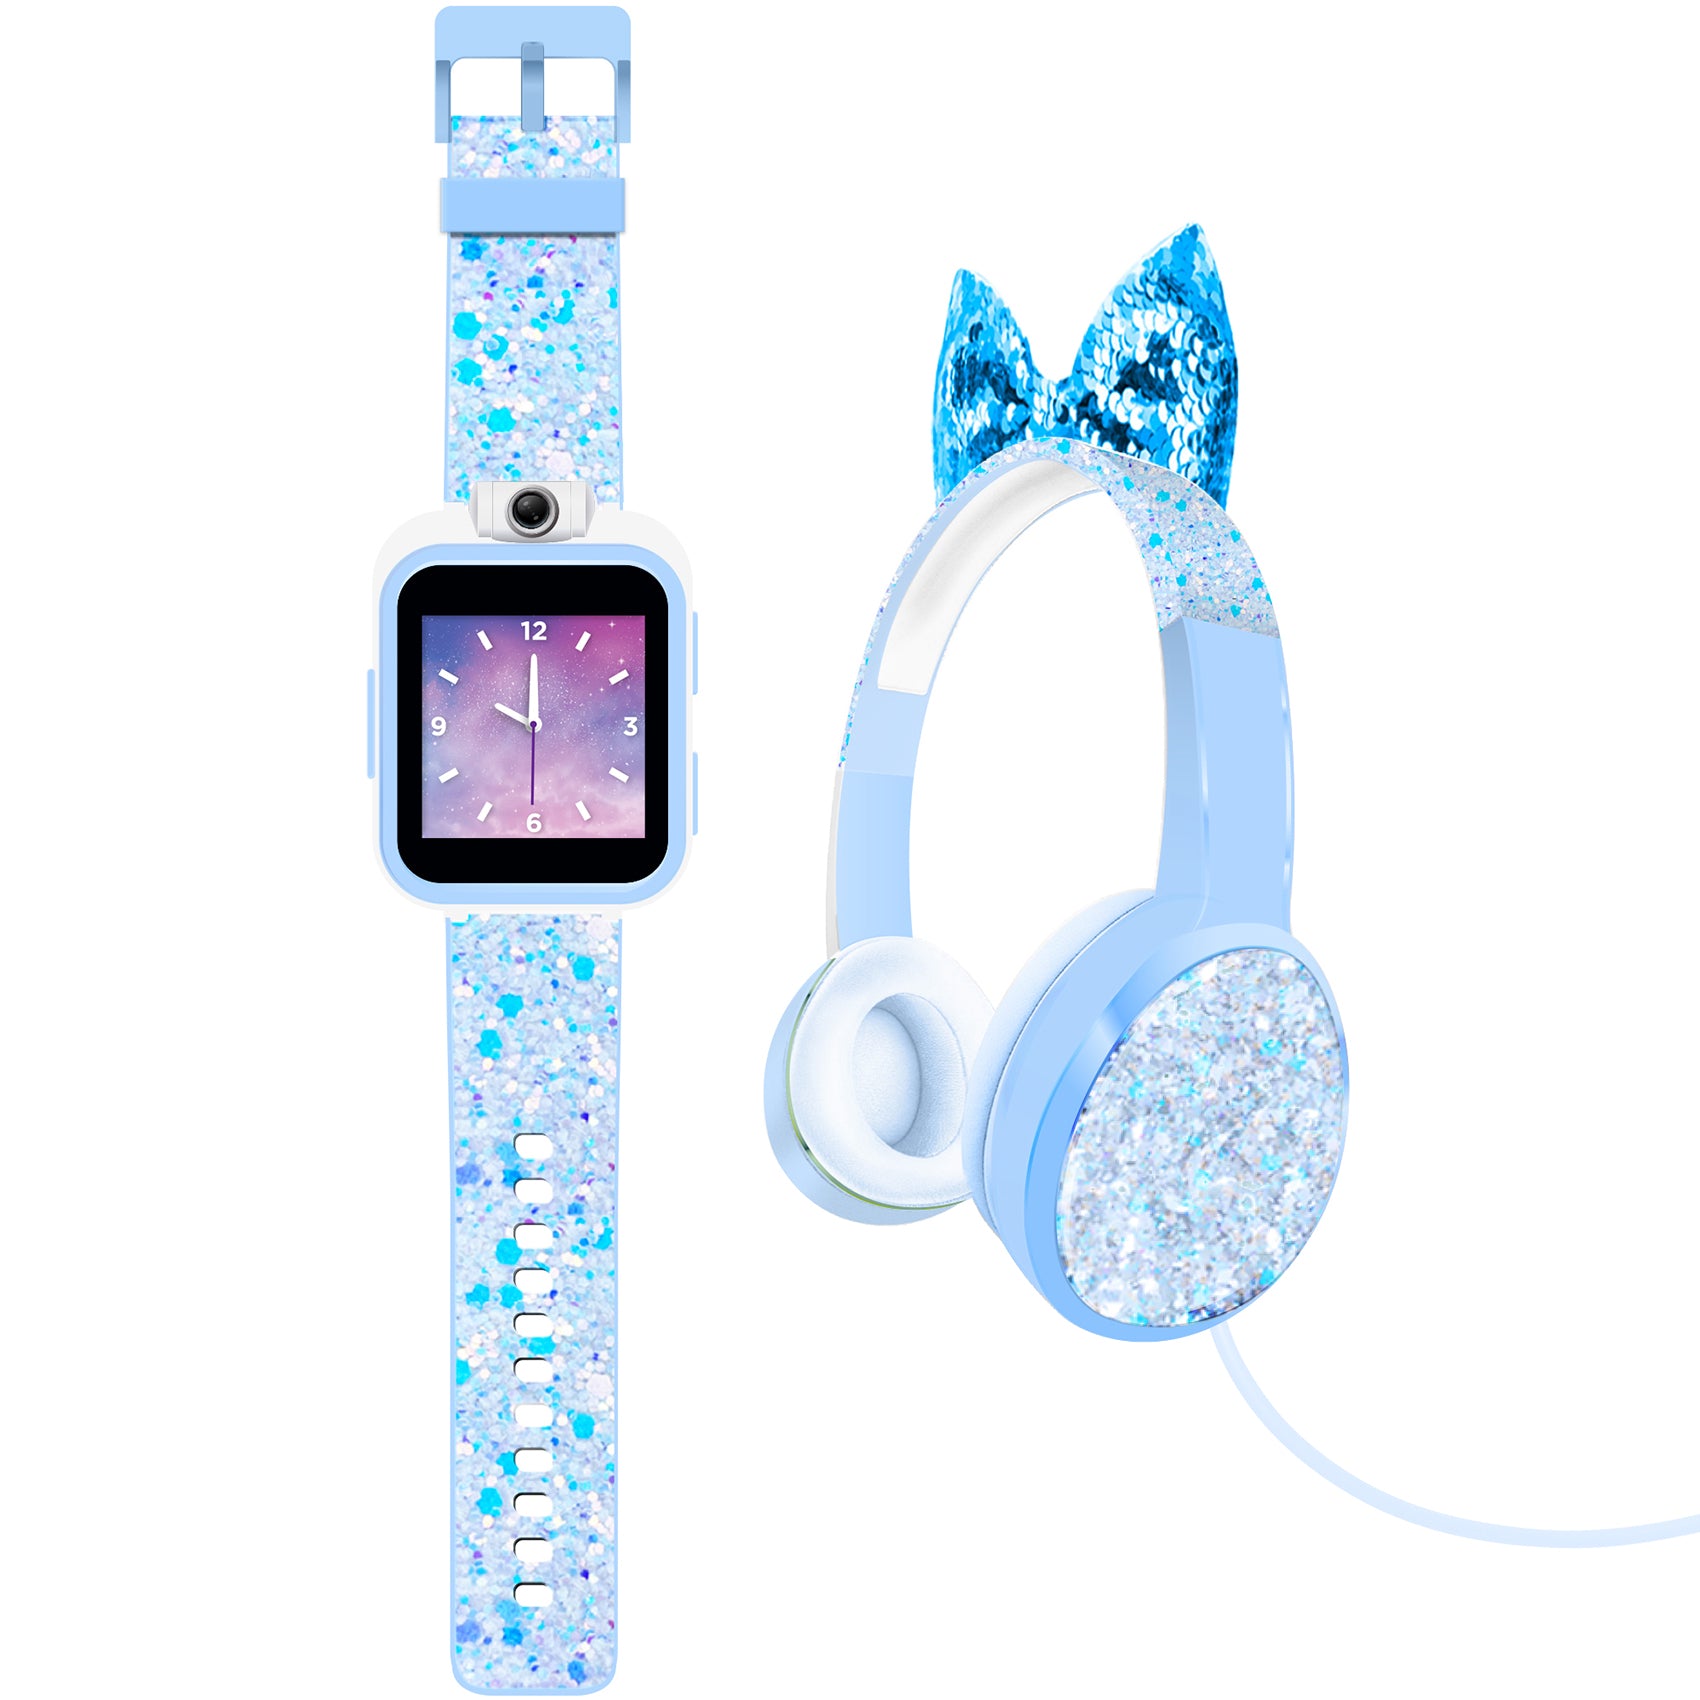 PlayZoom 2 Kids Smartwatch with Headphones: Light Blue Sparkle affordable smart watch with headphones